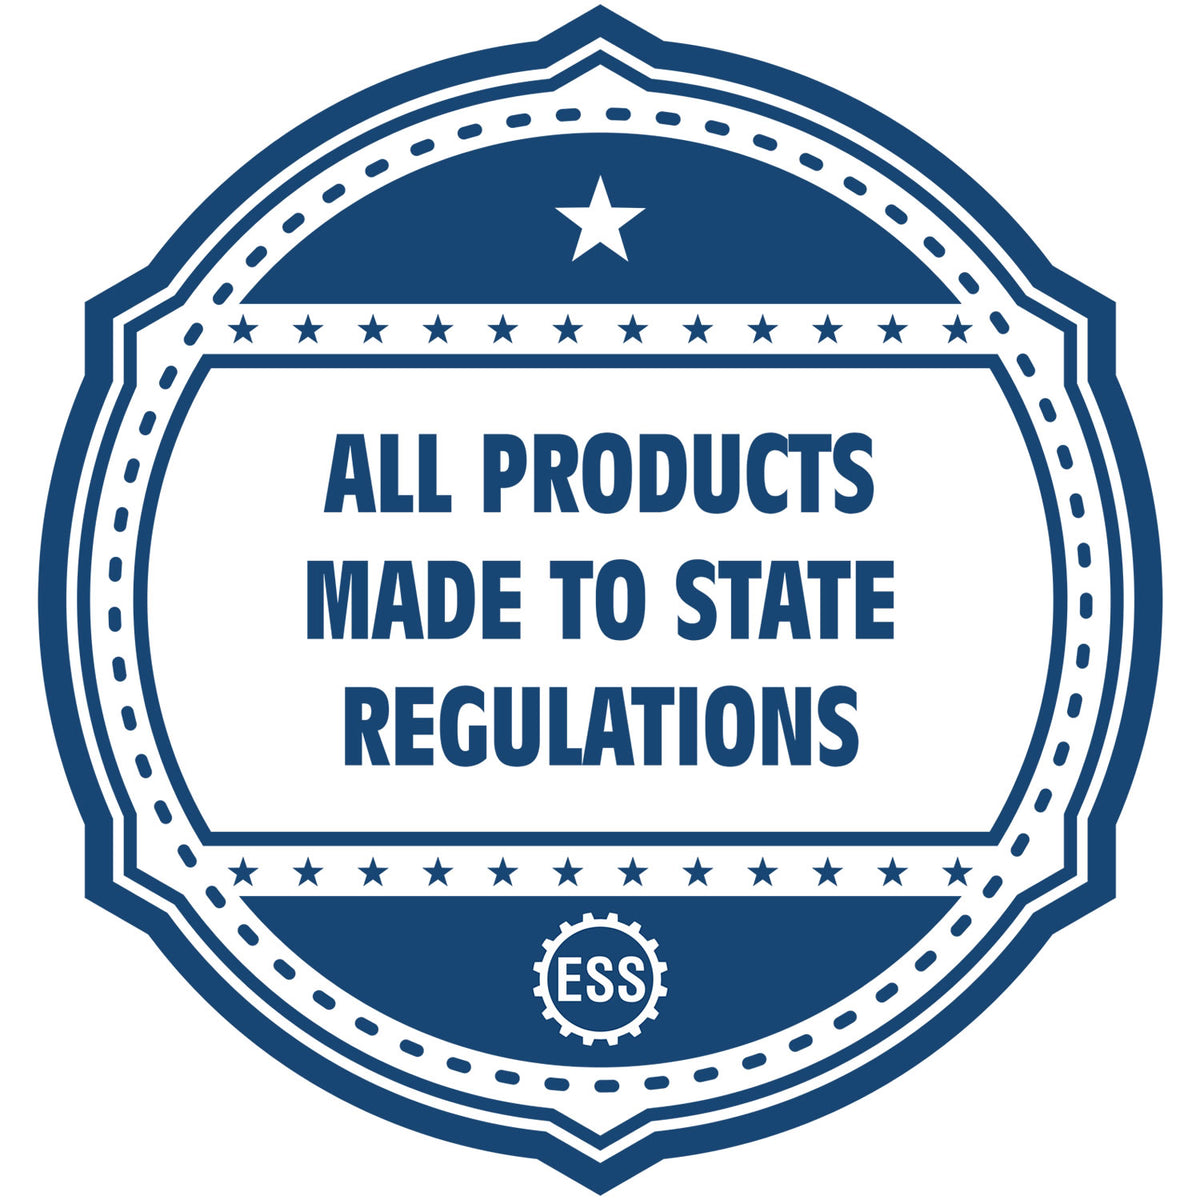 An icon or badge element for the Digital South Carolina PE Stamp and Electronic Seal for South Carolina Engineer showing that this product is made in compliance with state regulations.